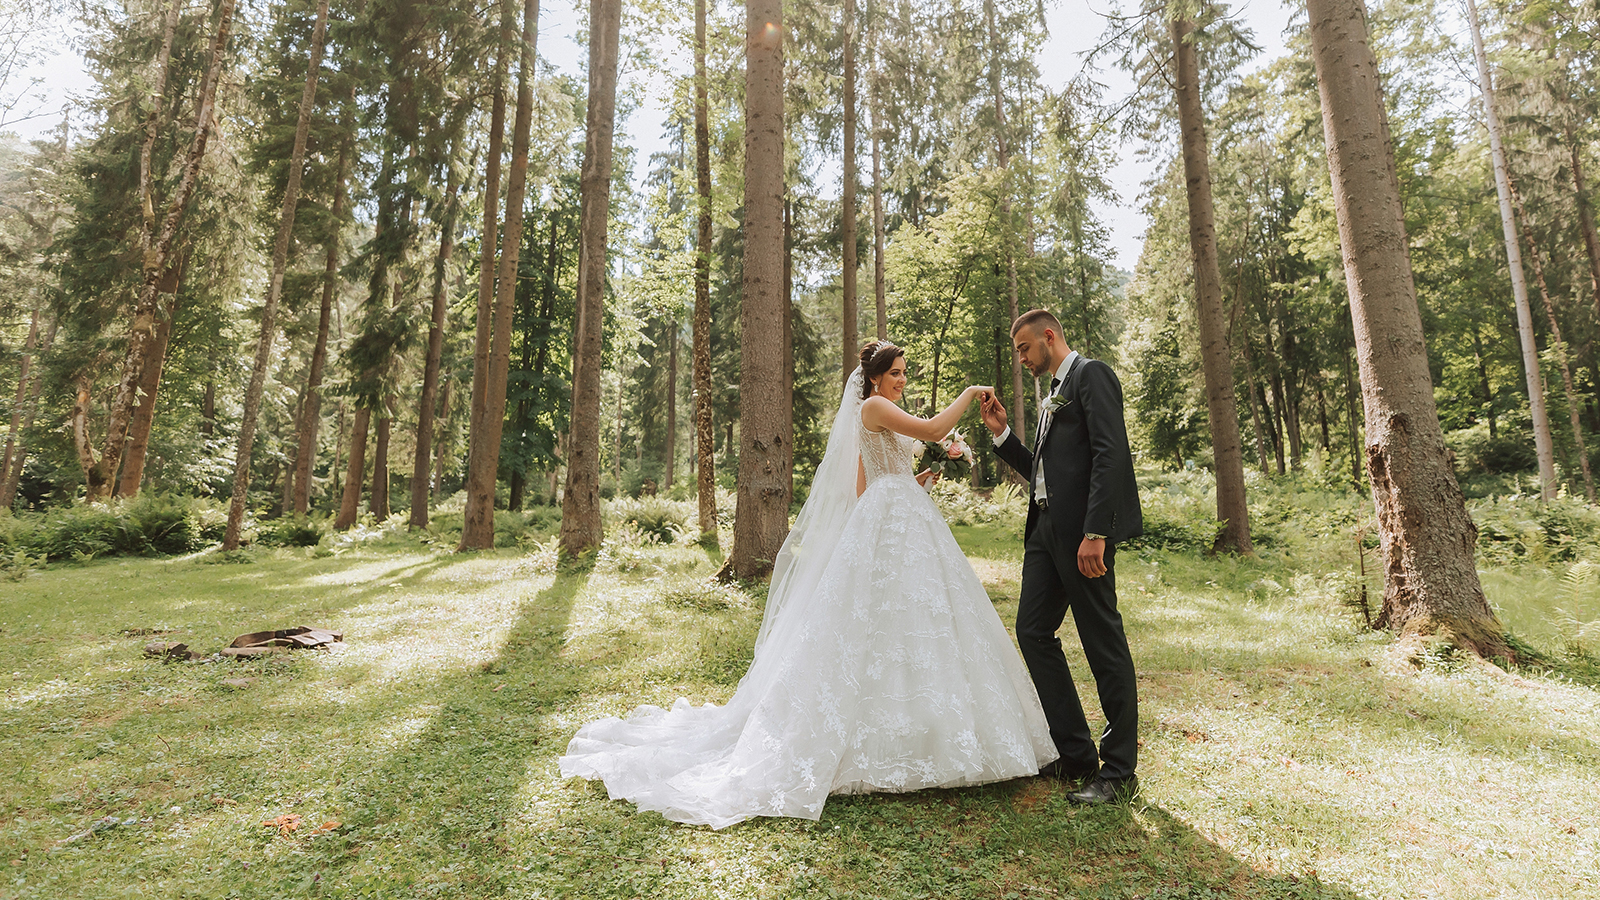 Fashionable groom and cute bride in white dress with train and crown on head walking happily in park, garden, forest outdoors. Wedding photography, portrait of smiling newlyweds.